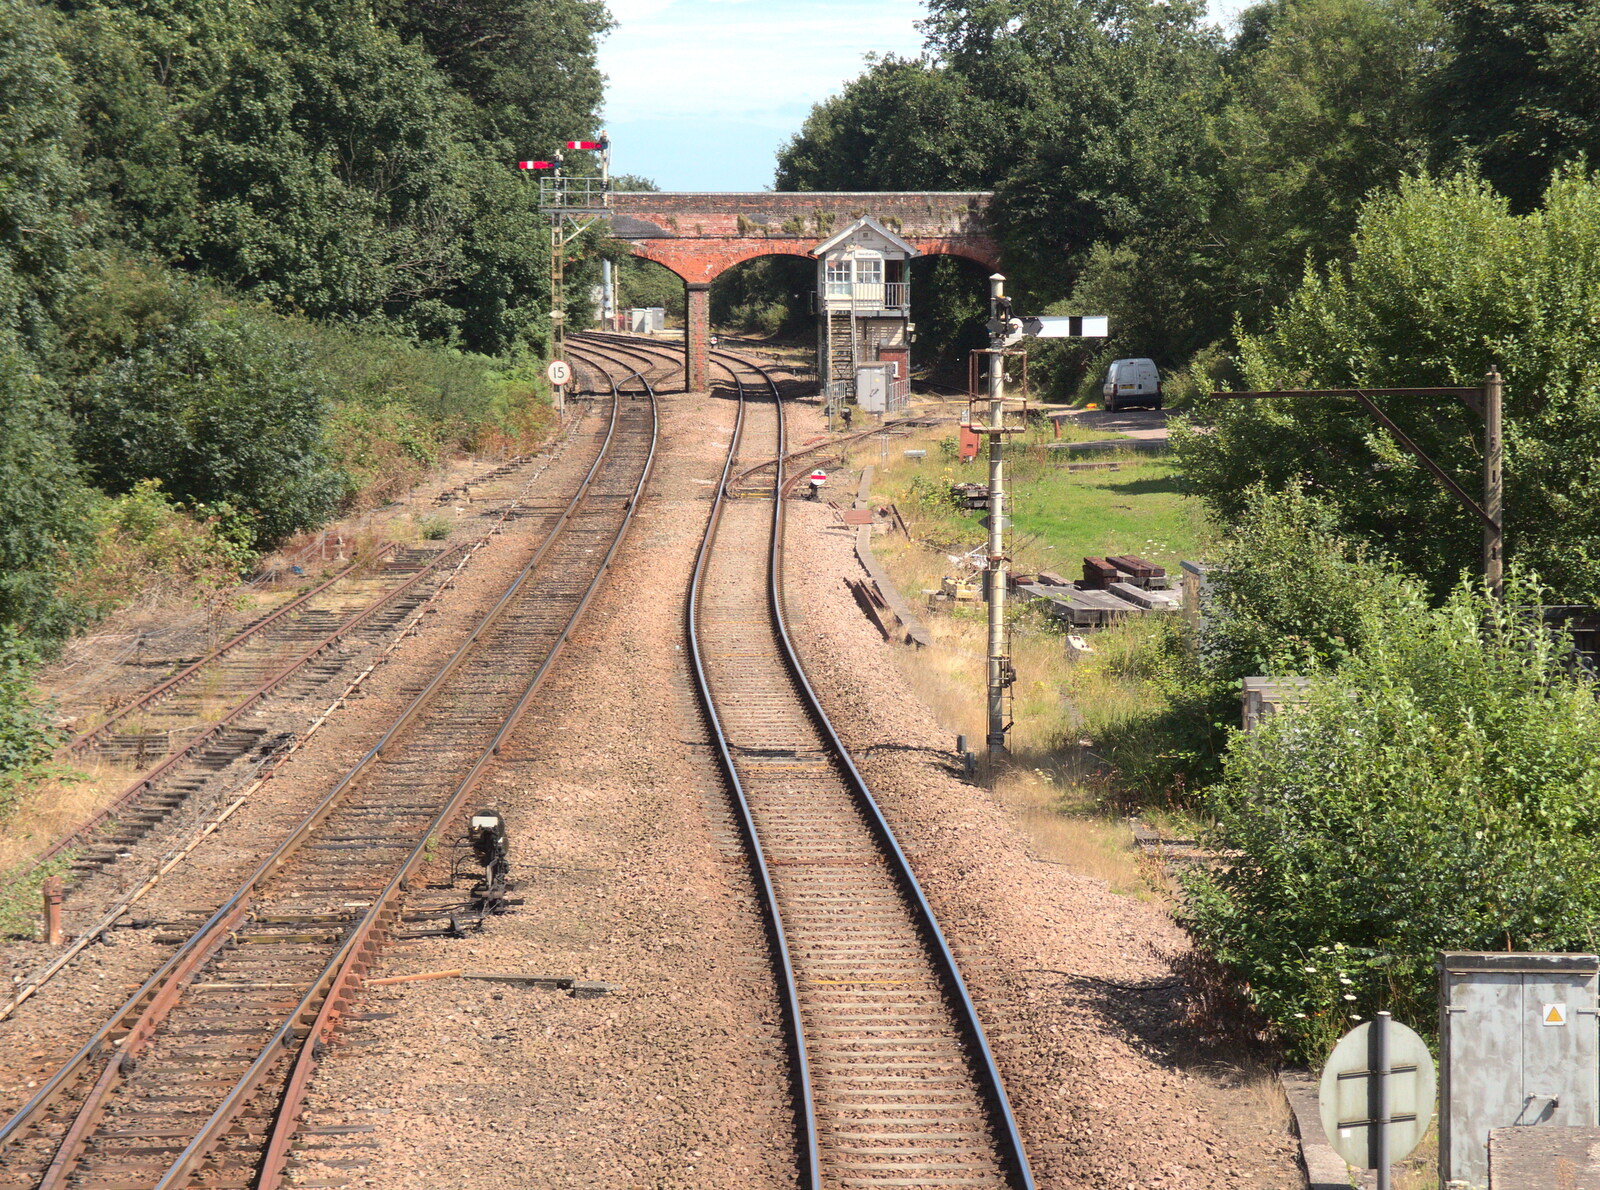 The winding tracks towards Yarmouth and Lowestoft from The Humpty Dumpty Beer Festival, Reedham, Norfolk - 22nd July 2017